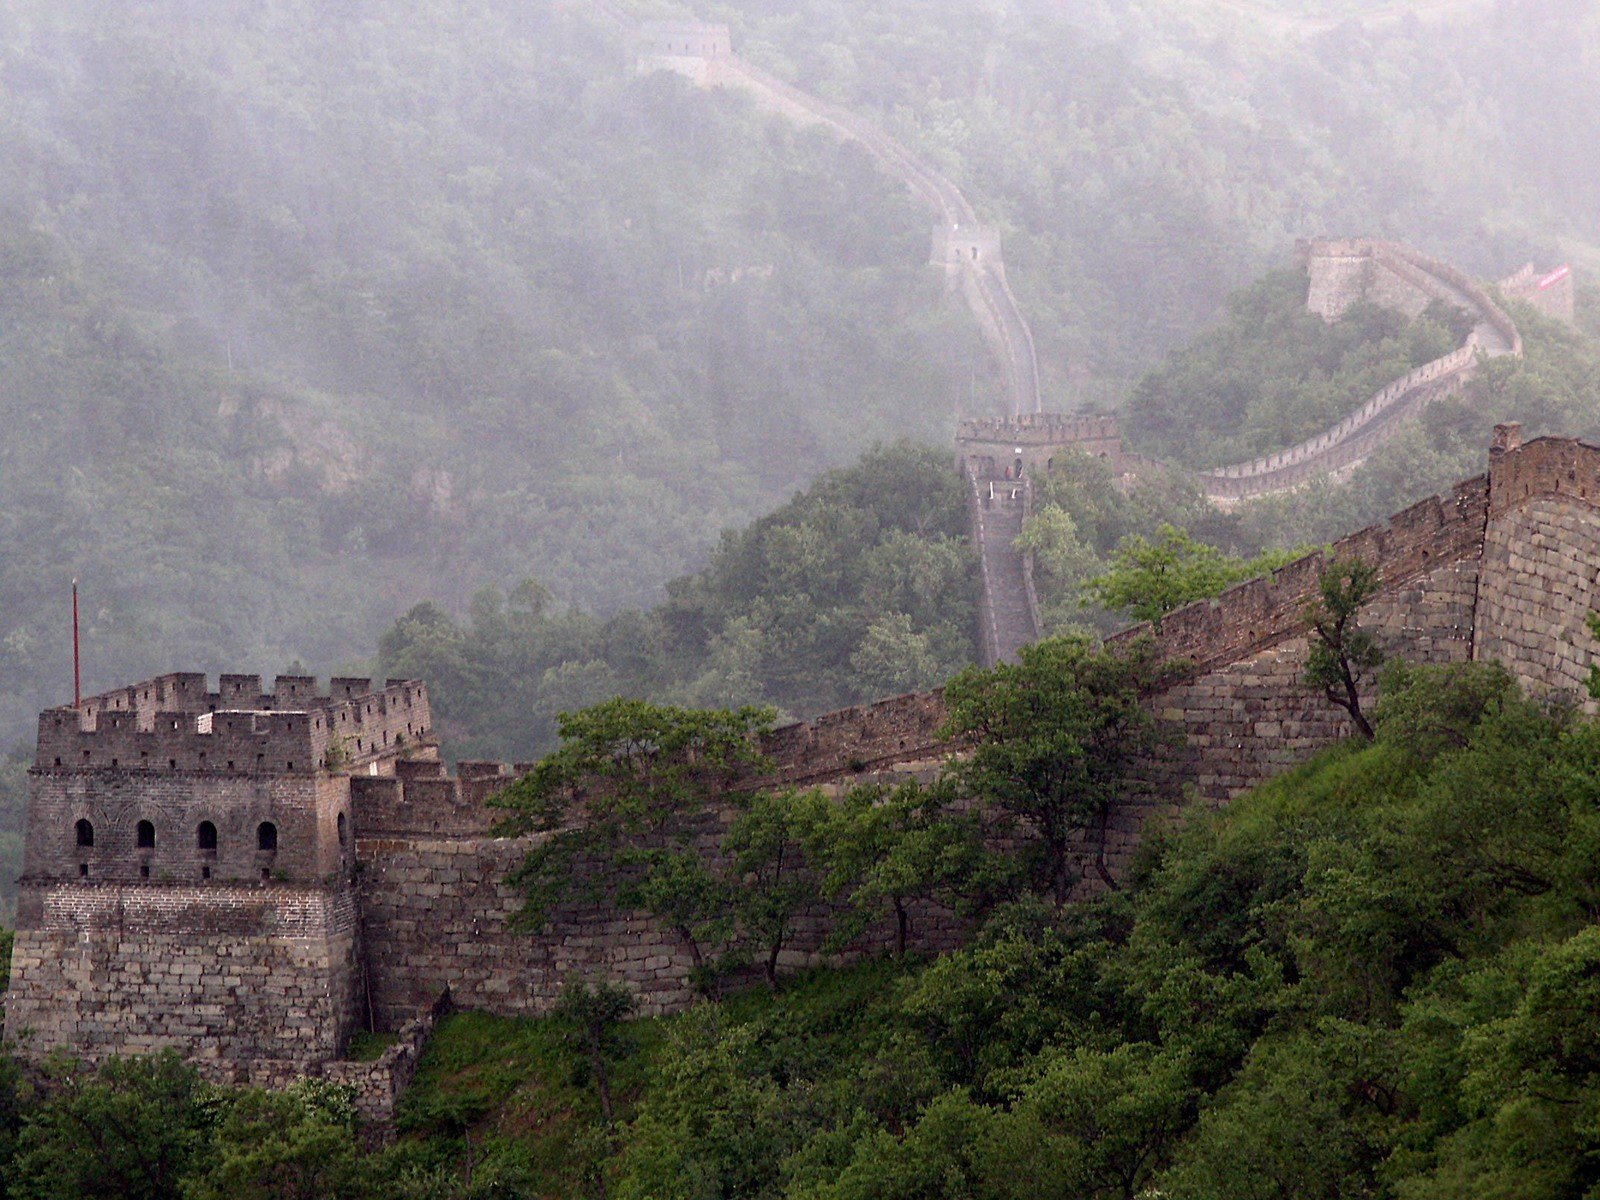 mountains, Castles, Trees, Stones, Fog, Mist, The, Great, Wall, Wall, Of, China Wallpaper